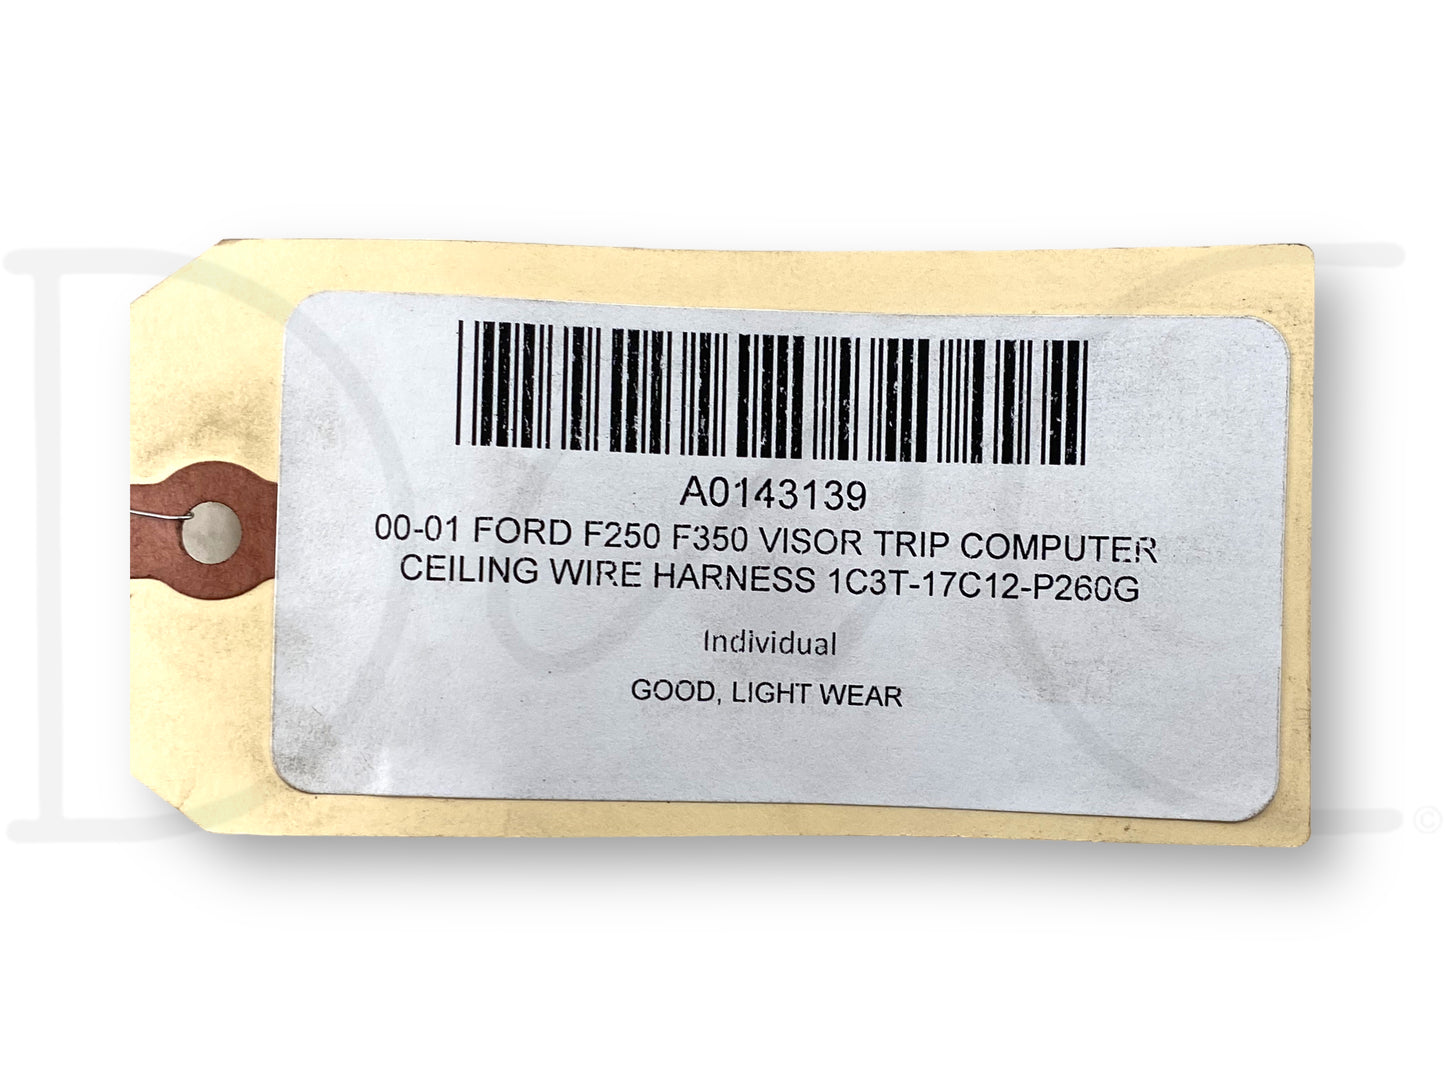 00-01 Ford F250 F350 Visor Trip Computer Ceiling Wire Harness 1C3T-17C12-P260G